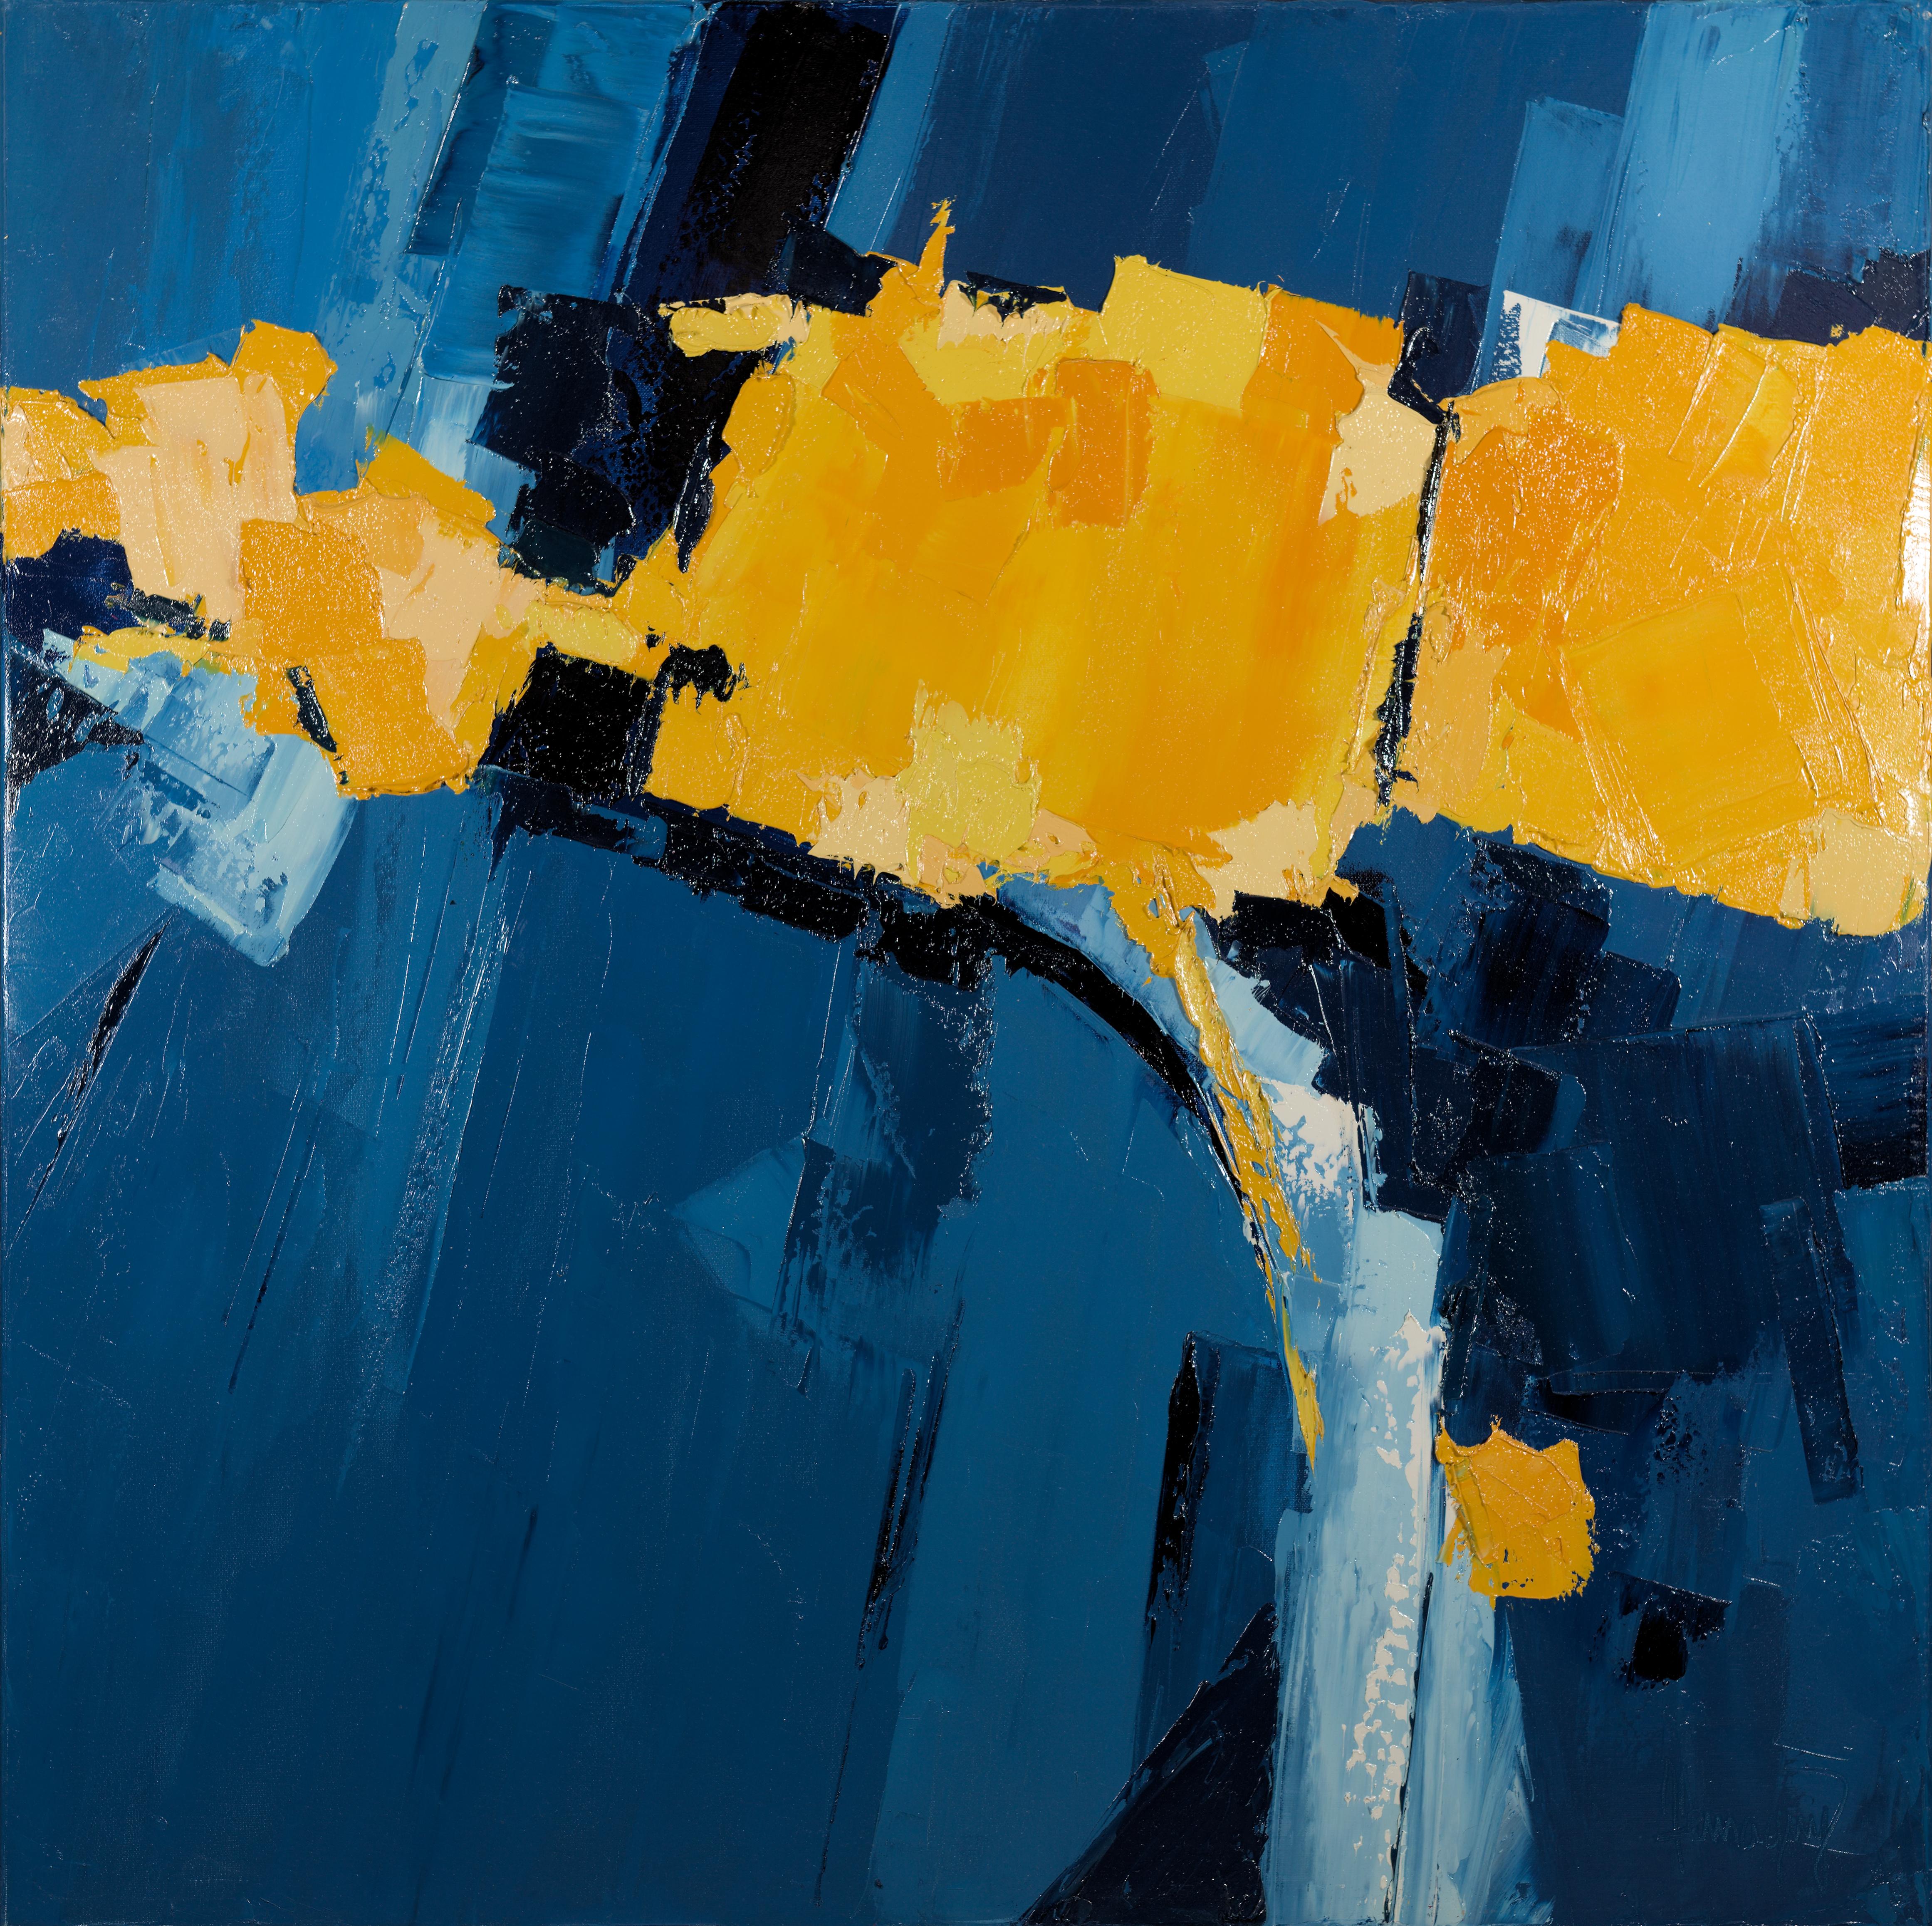 "Yellow Symphony", Contrast Blue Musical Movement Abstract Oil Painting